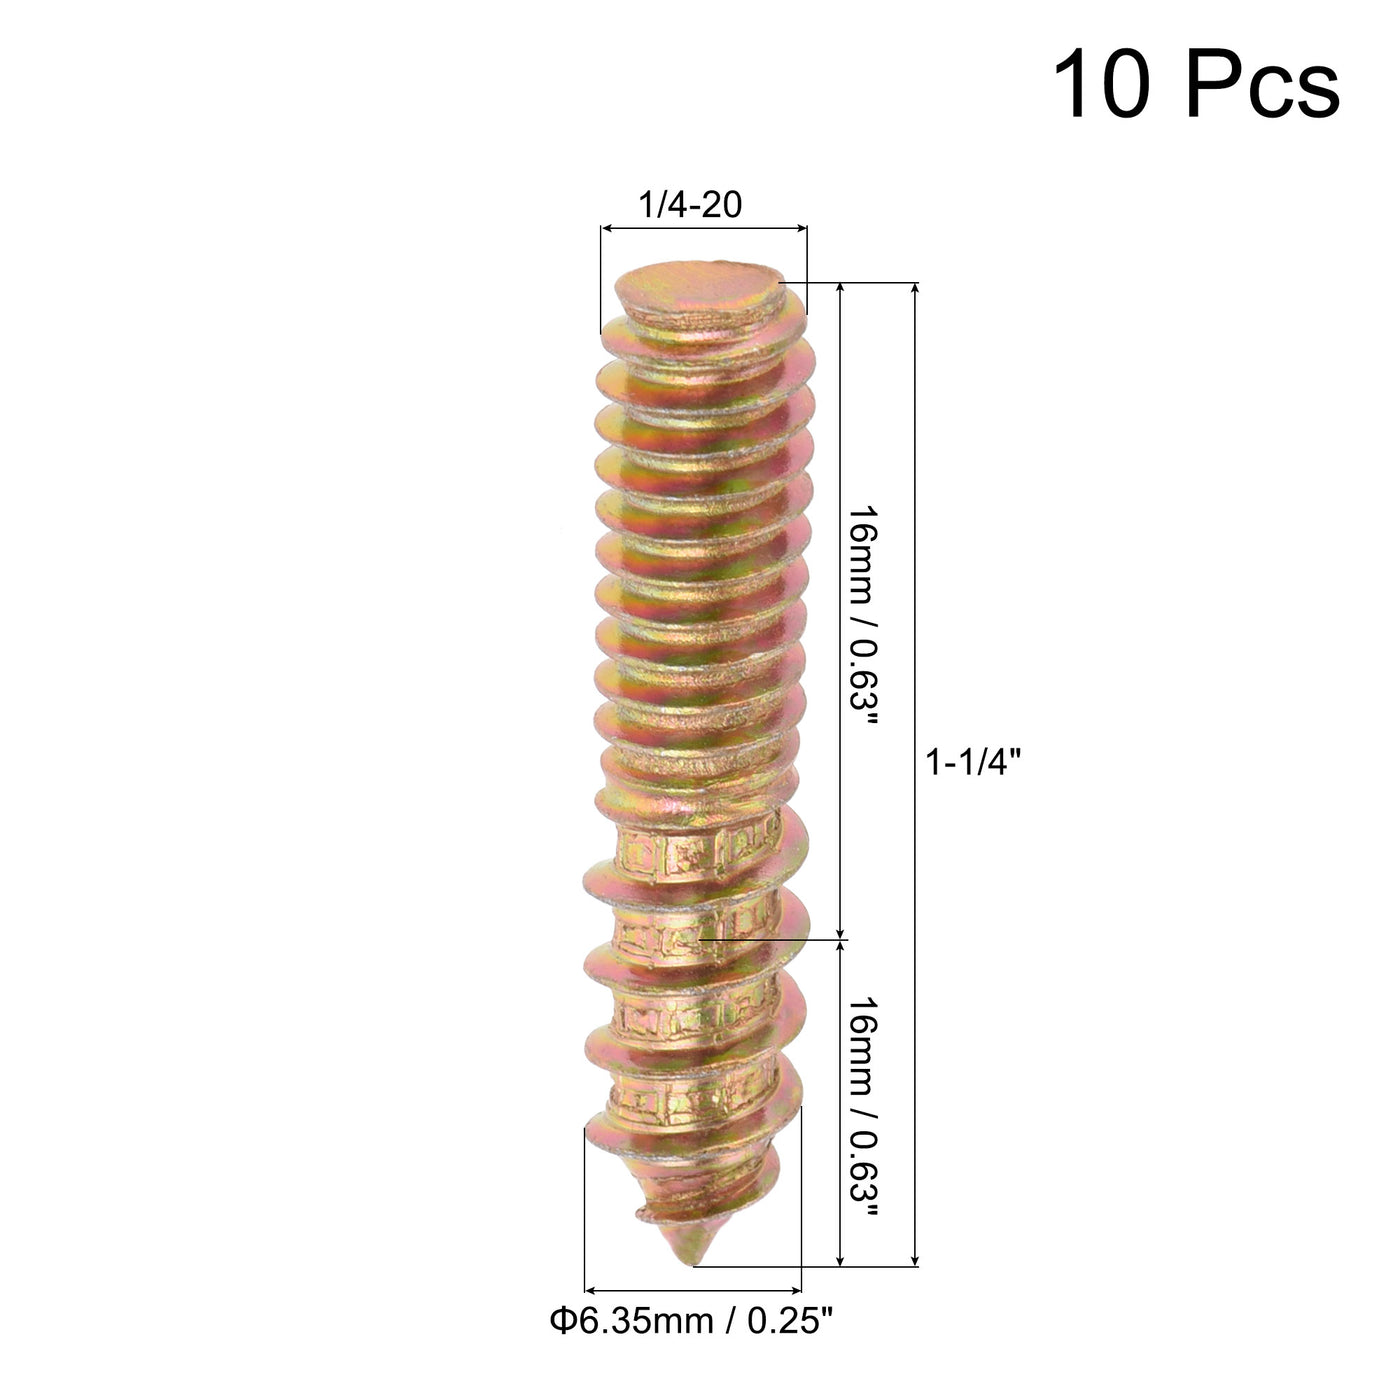 Uxcell Uxcell 10pcs 1/4-20 x 1-1/4" Hanger Bolts Double Head Dowel Screw for Wood Furniture